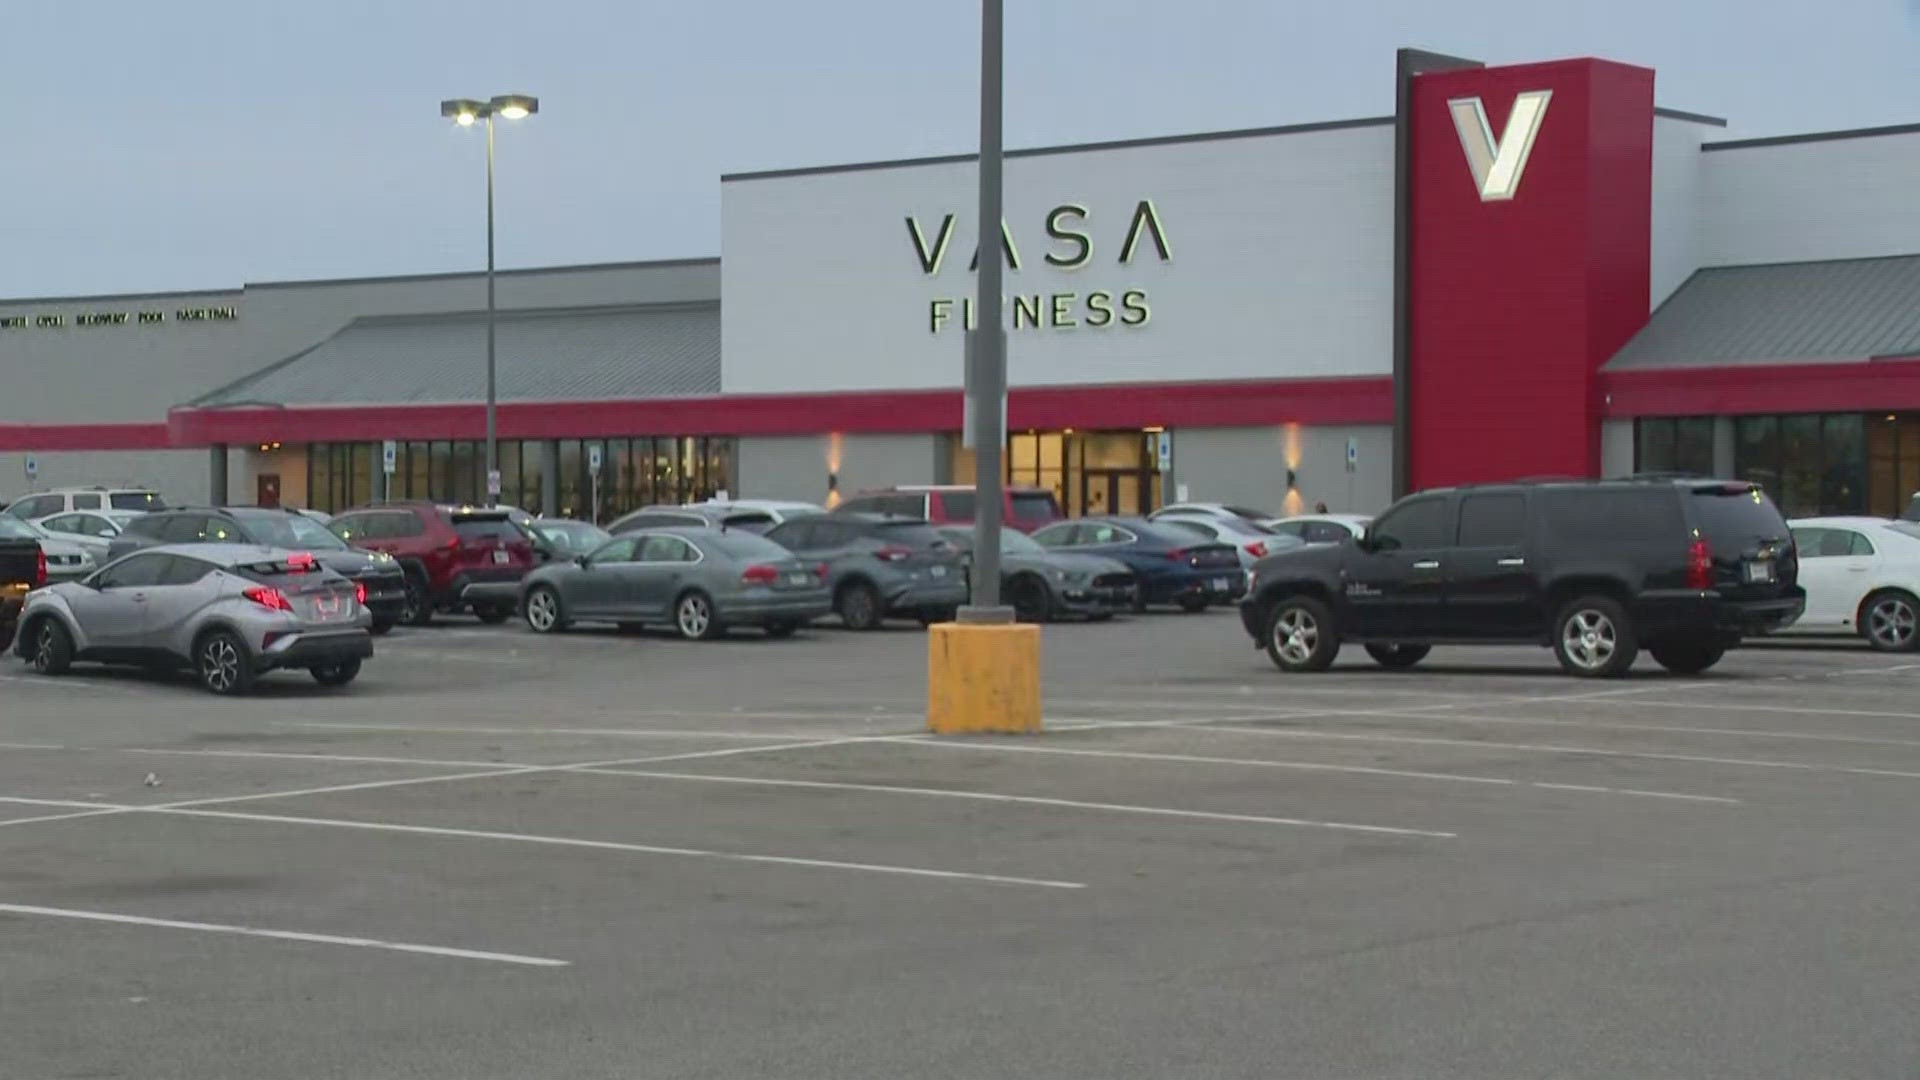 Vasa fitness reopens after shooting